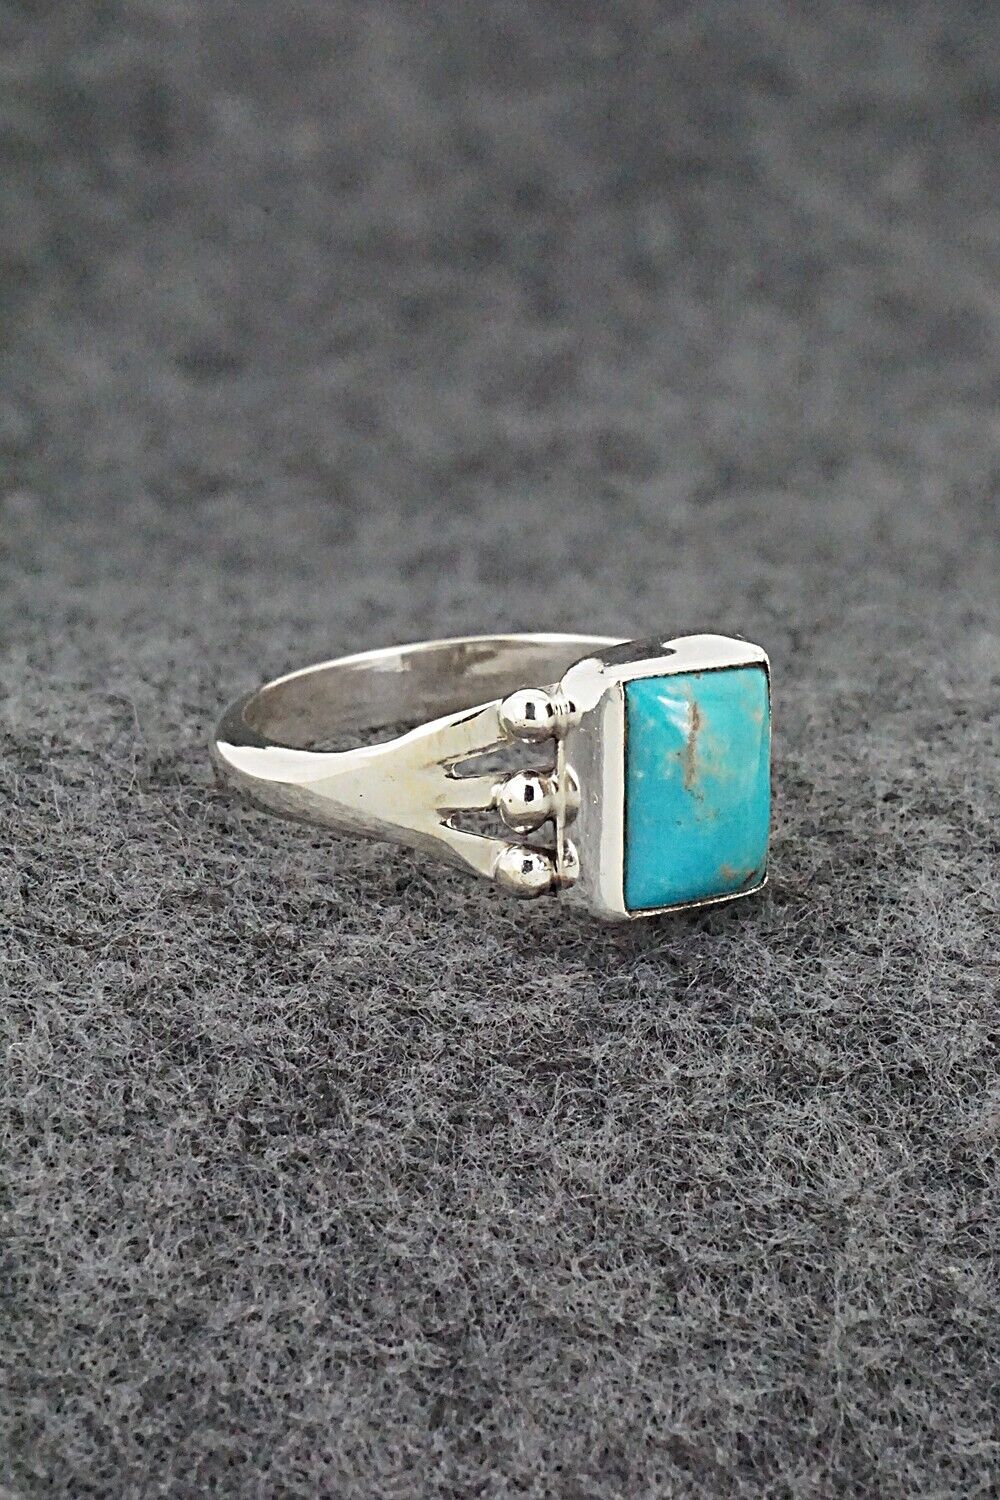 Turquoise & Sterling Silver Ring - Jerryson Henio - Size 9.25